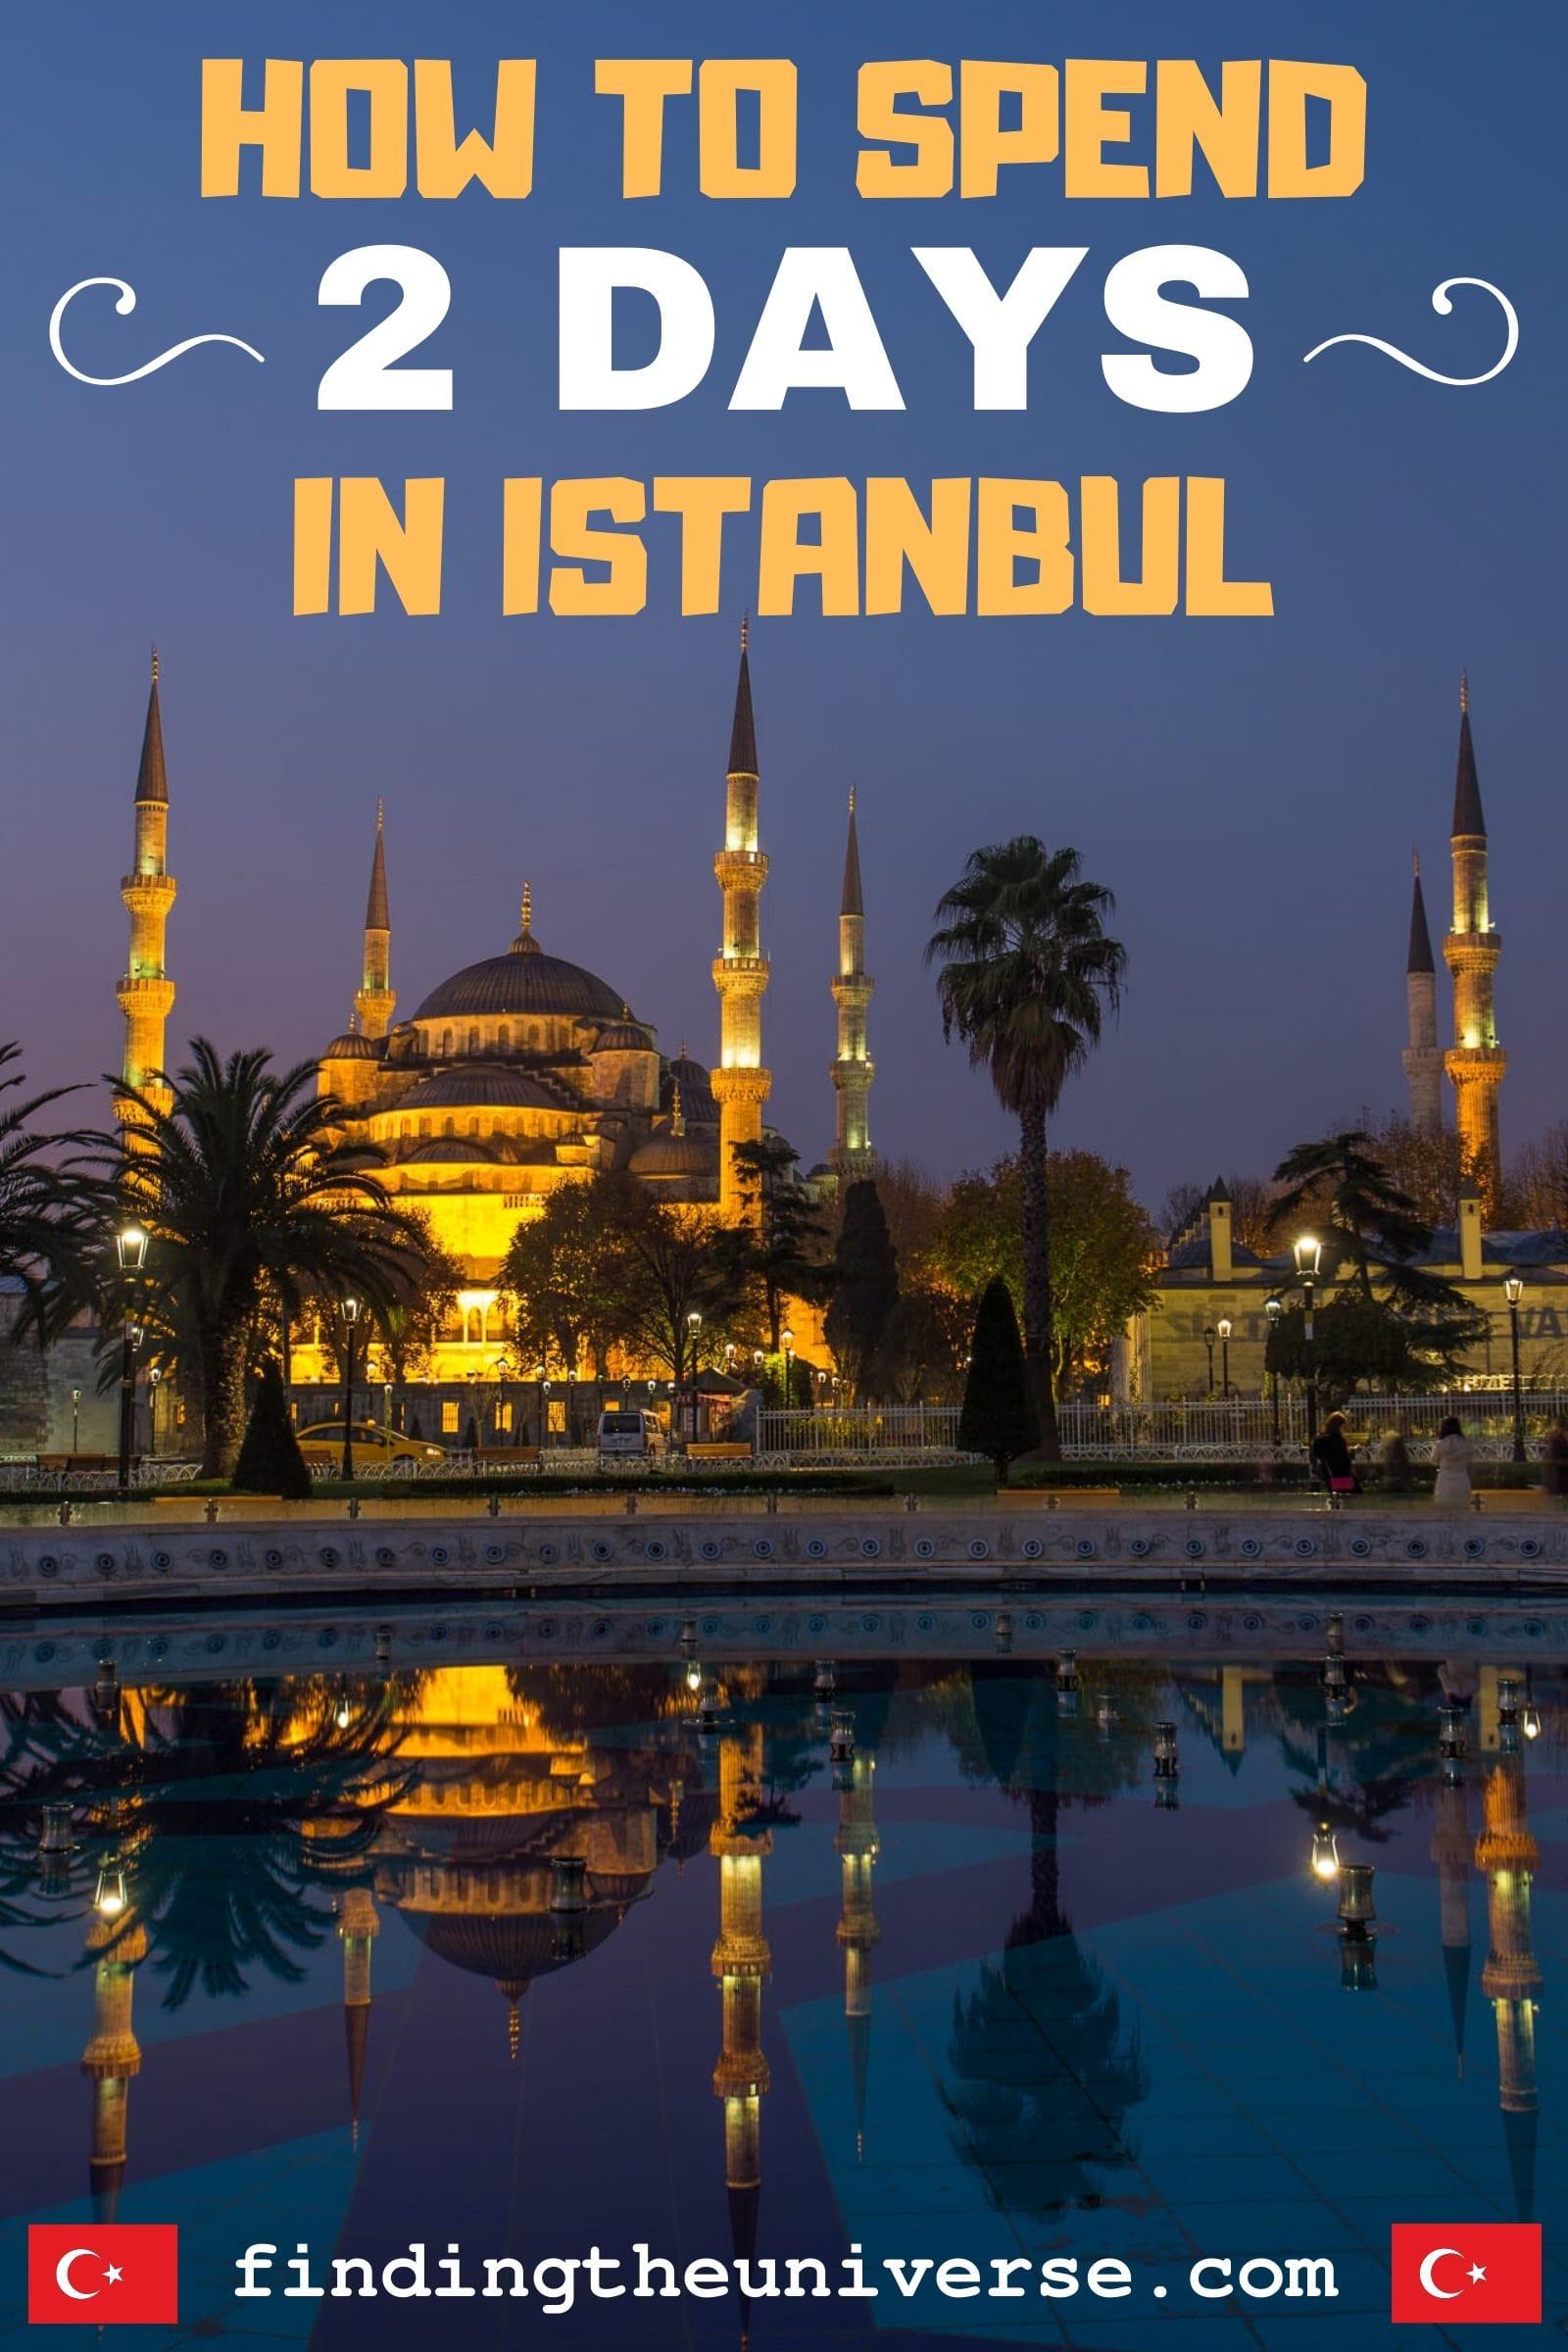 A detailed guide to spending 2 days in Istanbul. Contains a complete 2 day Istanbul itinerary, as well as a map and tips for your visit